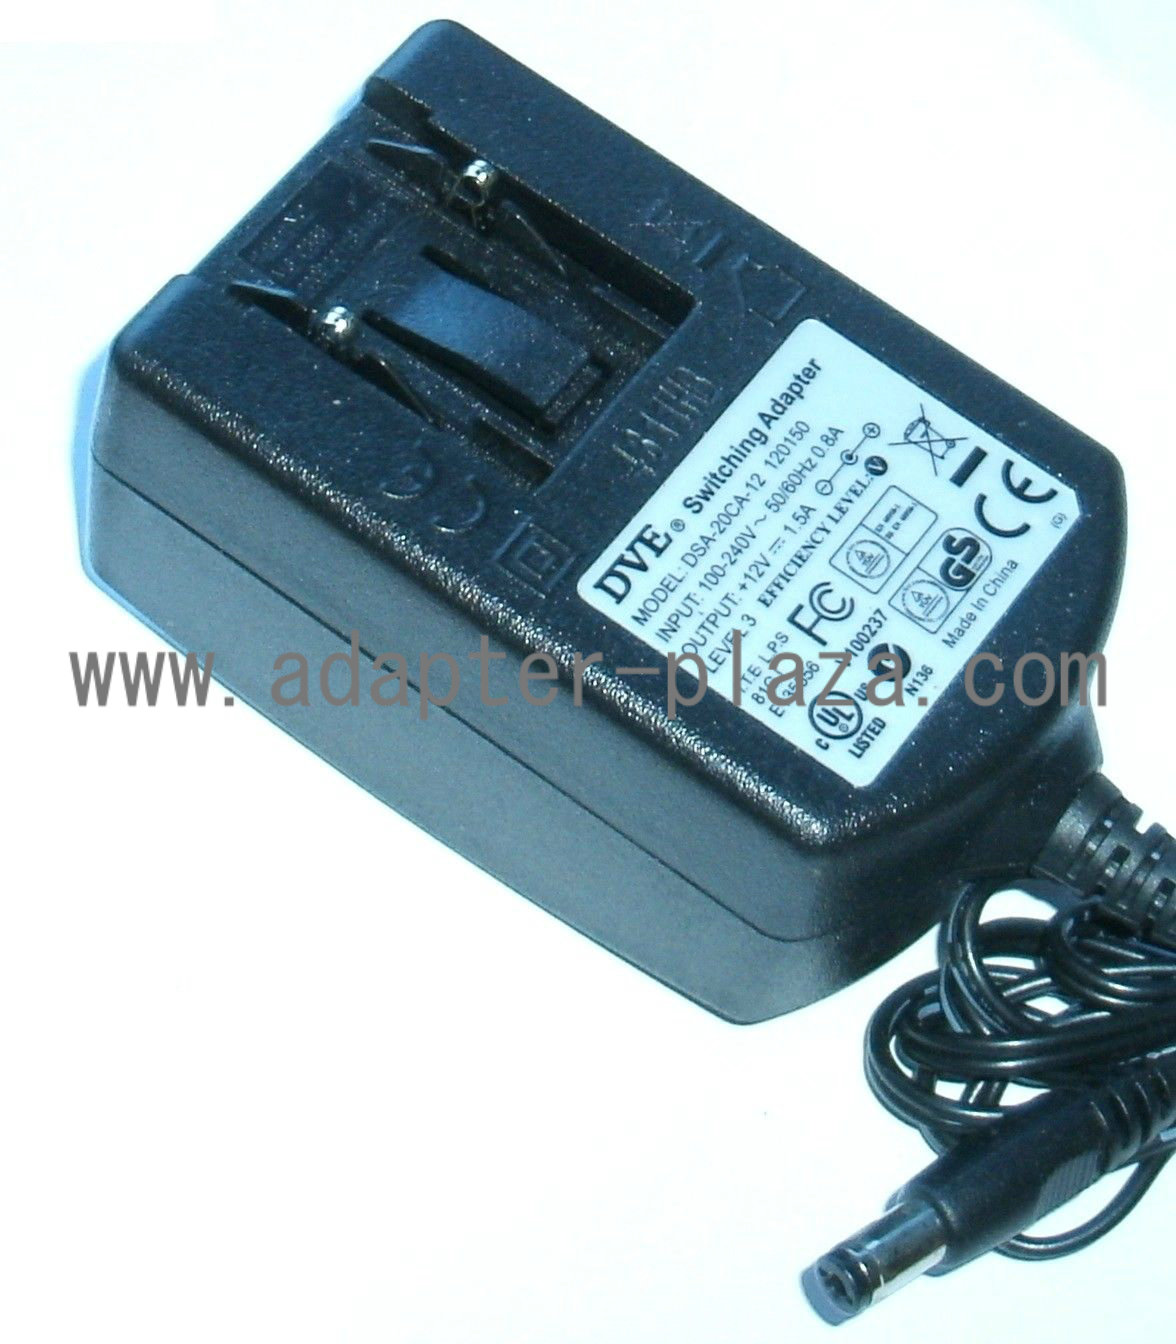 New DVE DSA-20CA-12 120150 12V 1.5A AC/DC ADAPTER Switching POWER SUPPLY - Click Image to Close